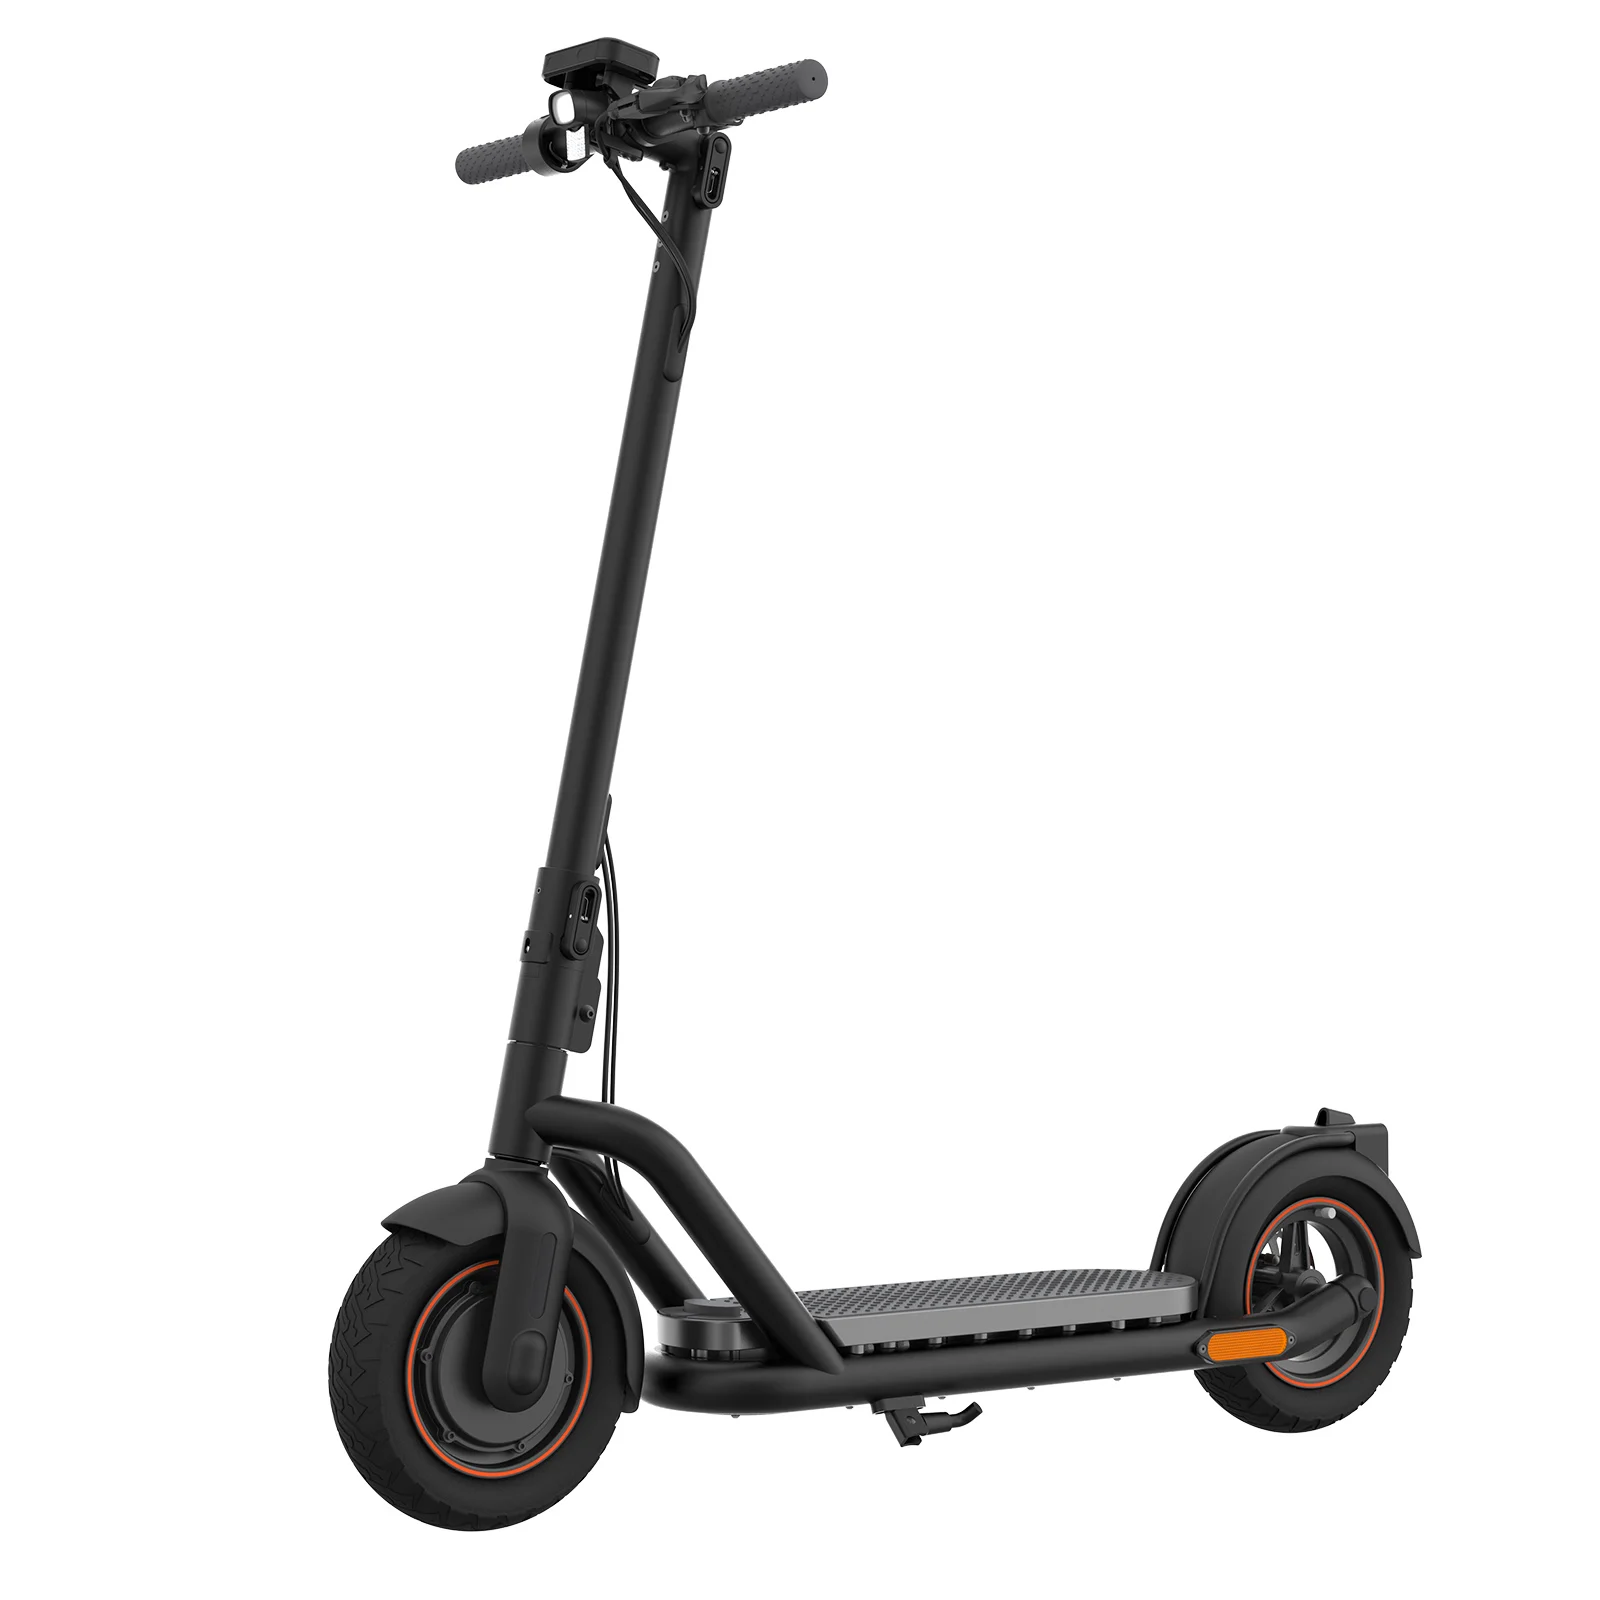 

Hot sale EU warehouse electric scooter NAVEE N65 500W 48V scooter, Black